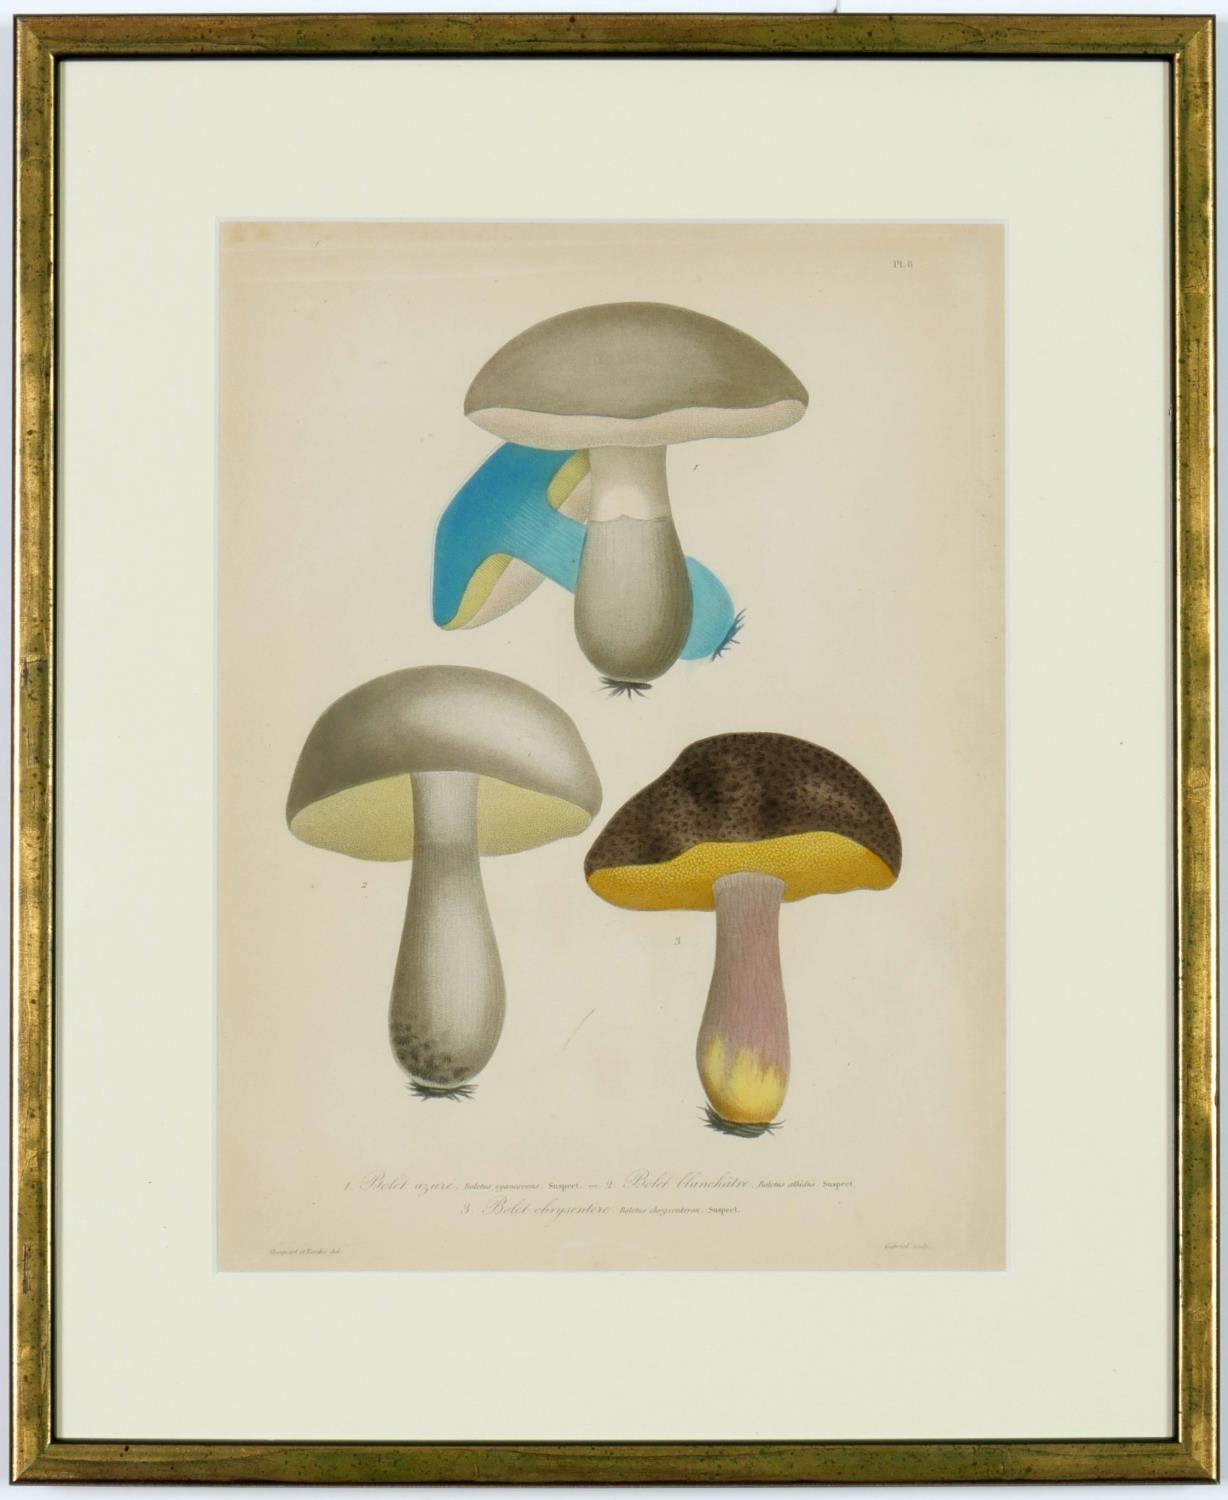 JOSEPH ROQUES, Mushrooms, a set of nine rare engravings with hand colouring, 1864, Victor Masson - Image 6 of 10